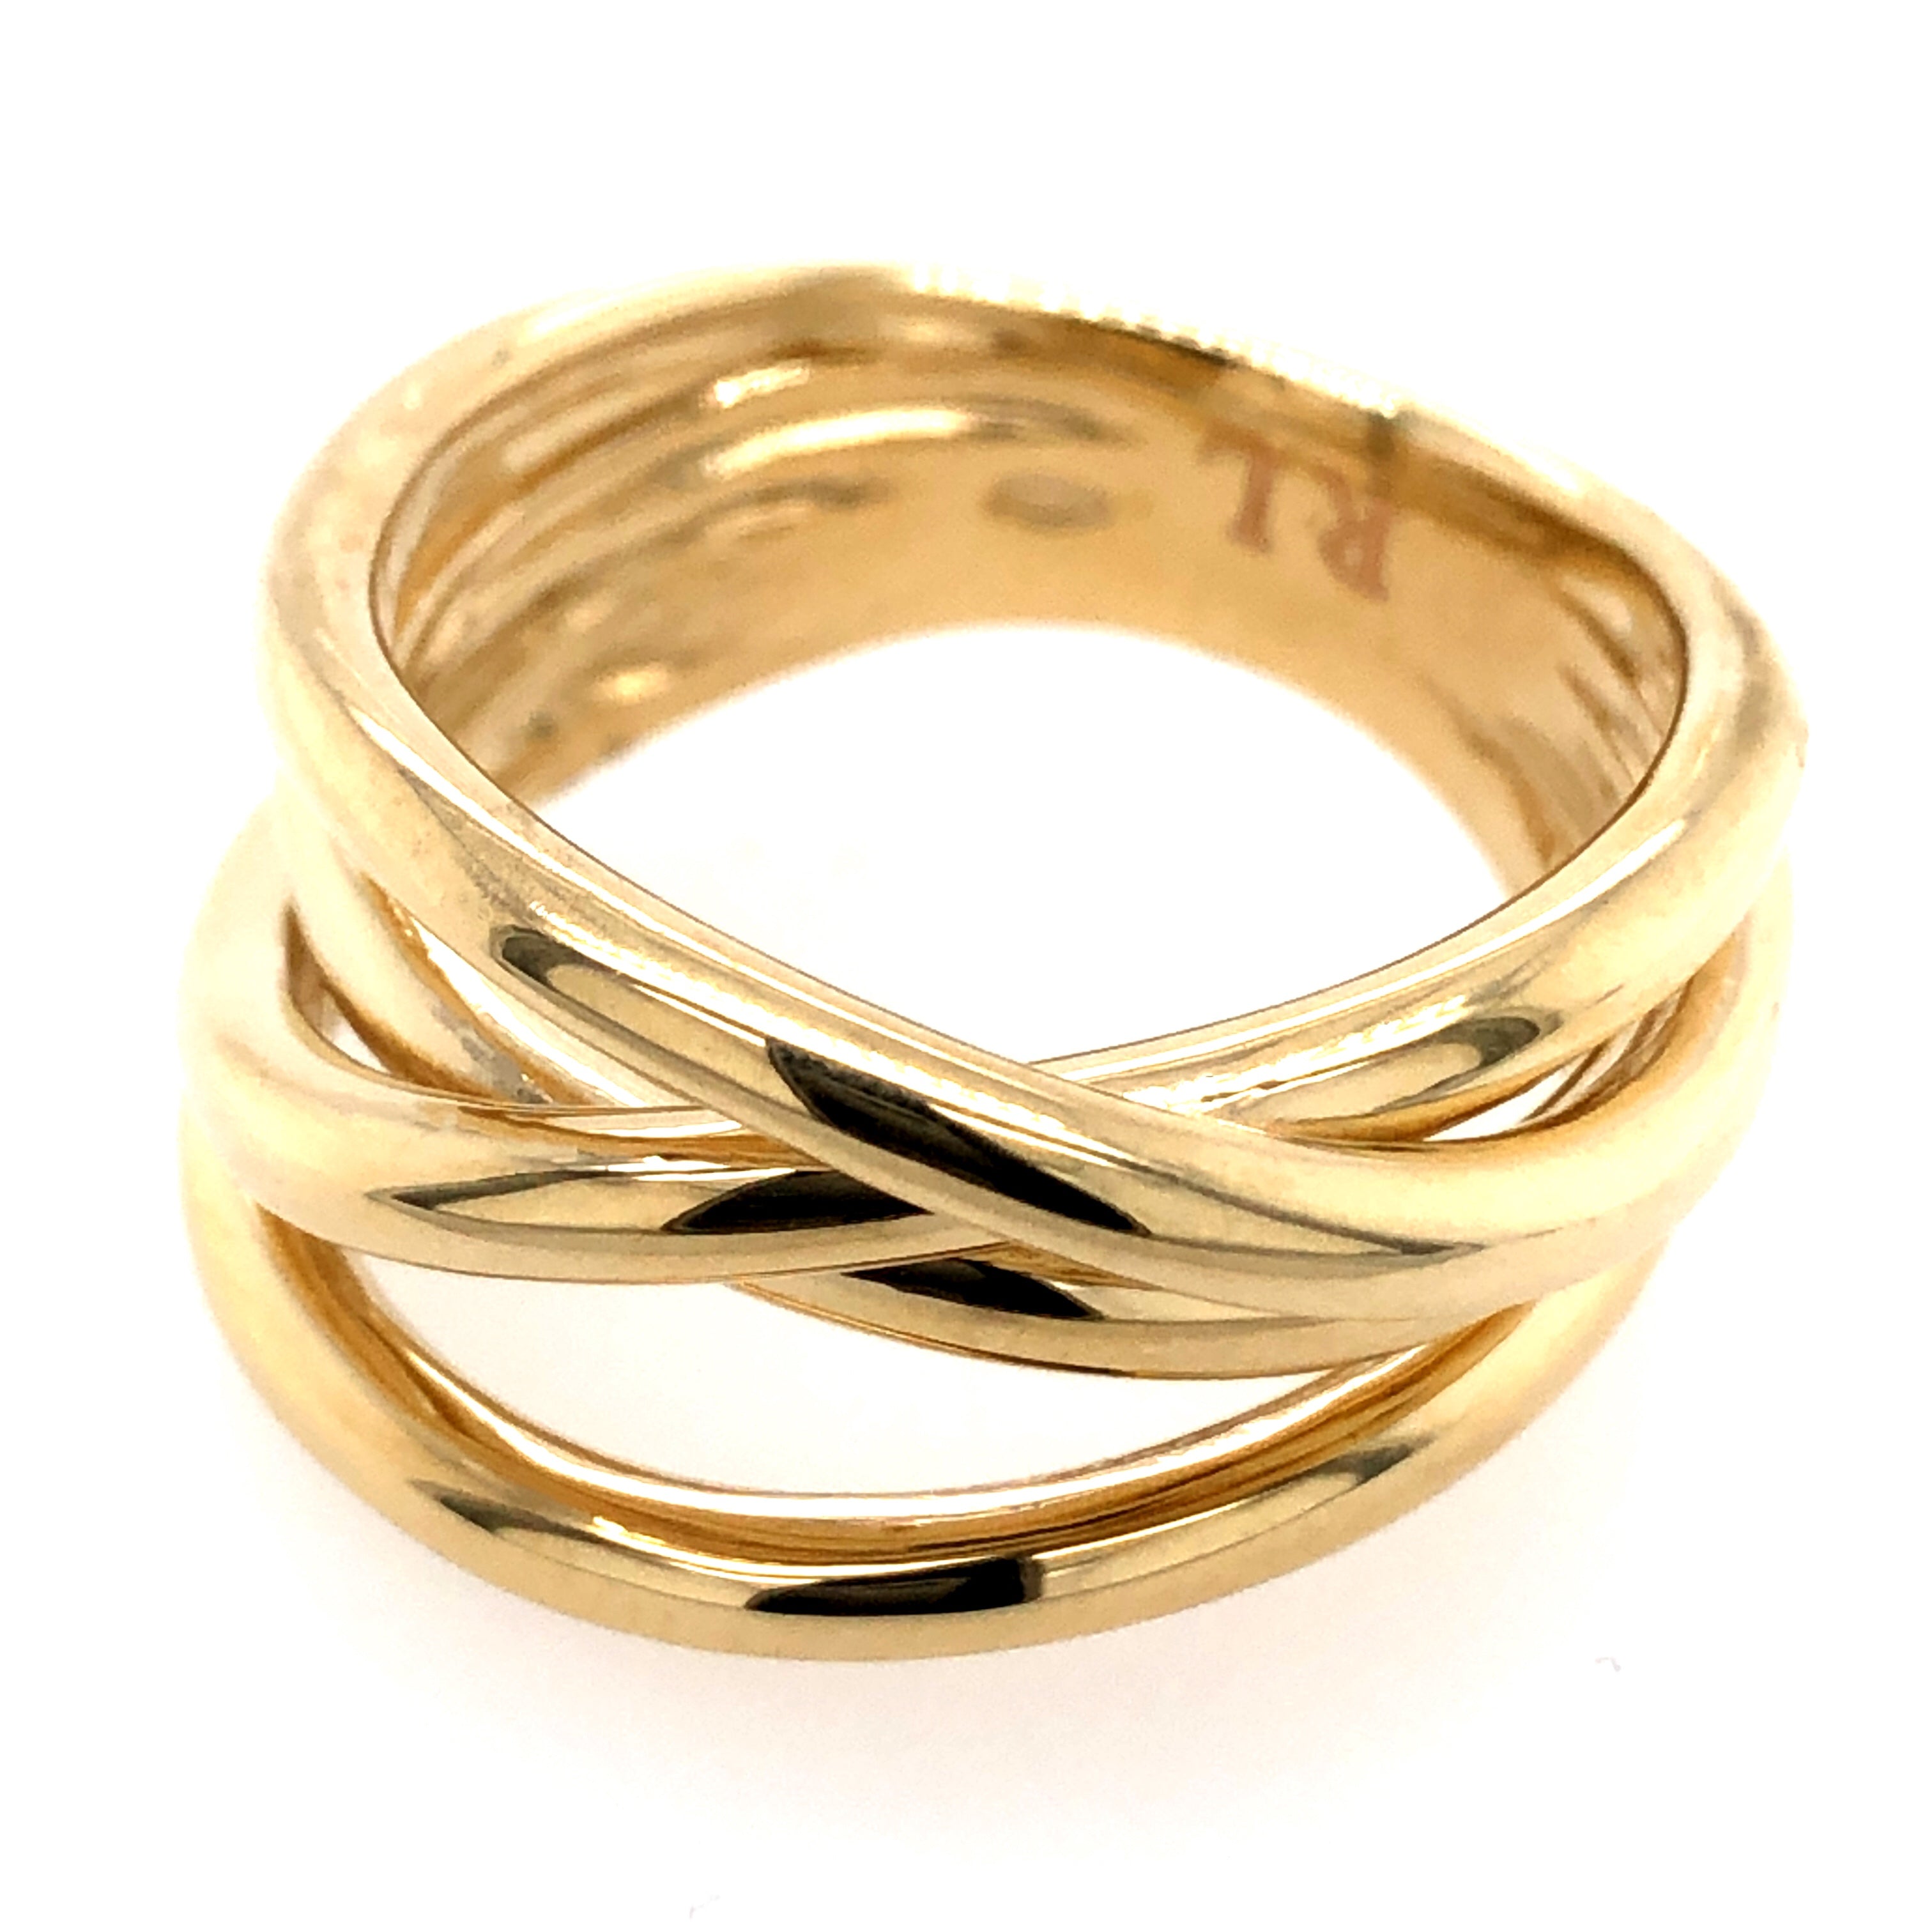 Entwined Fashion Ring - Gold Fashion Rings - Womens